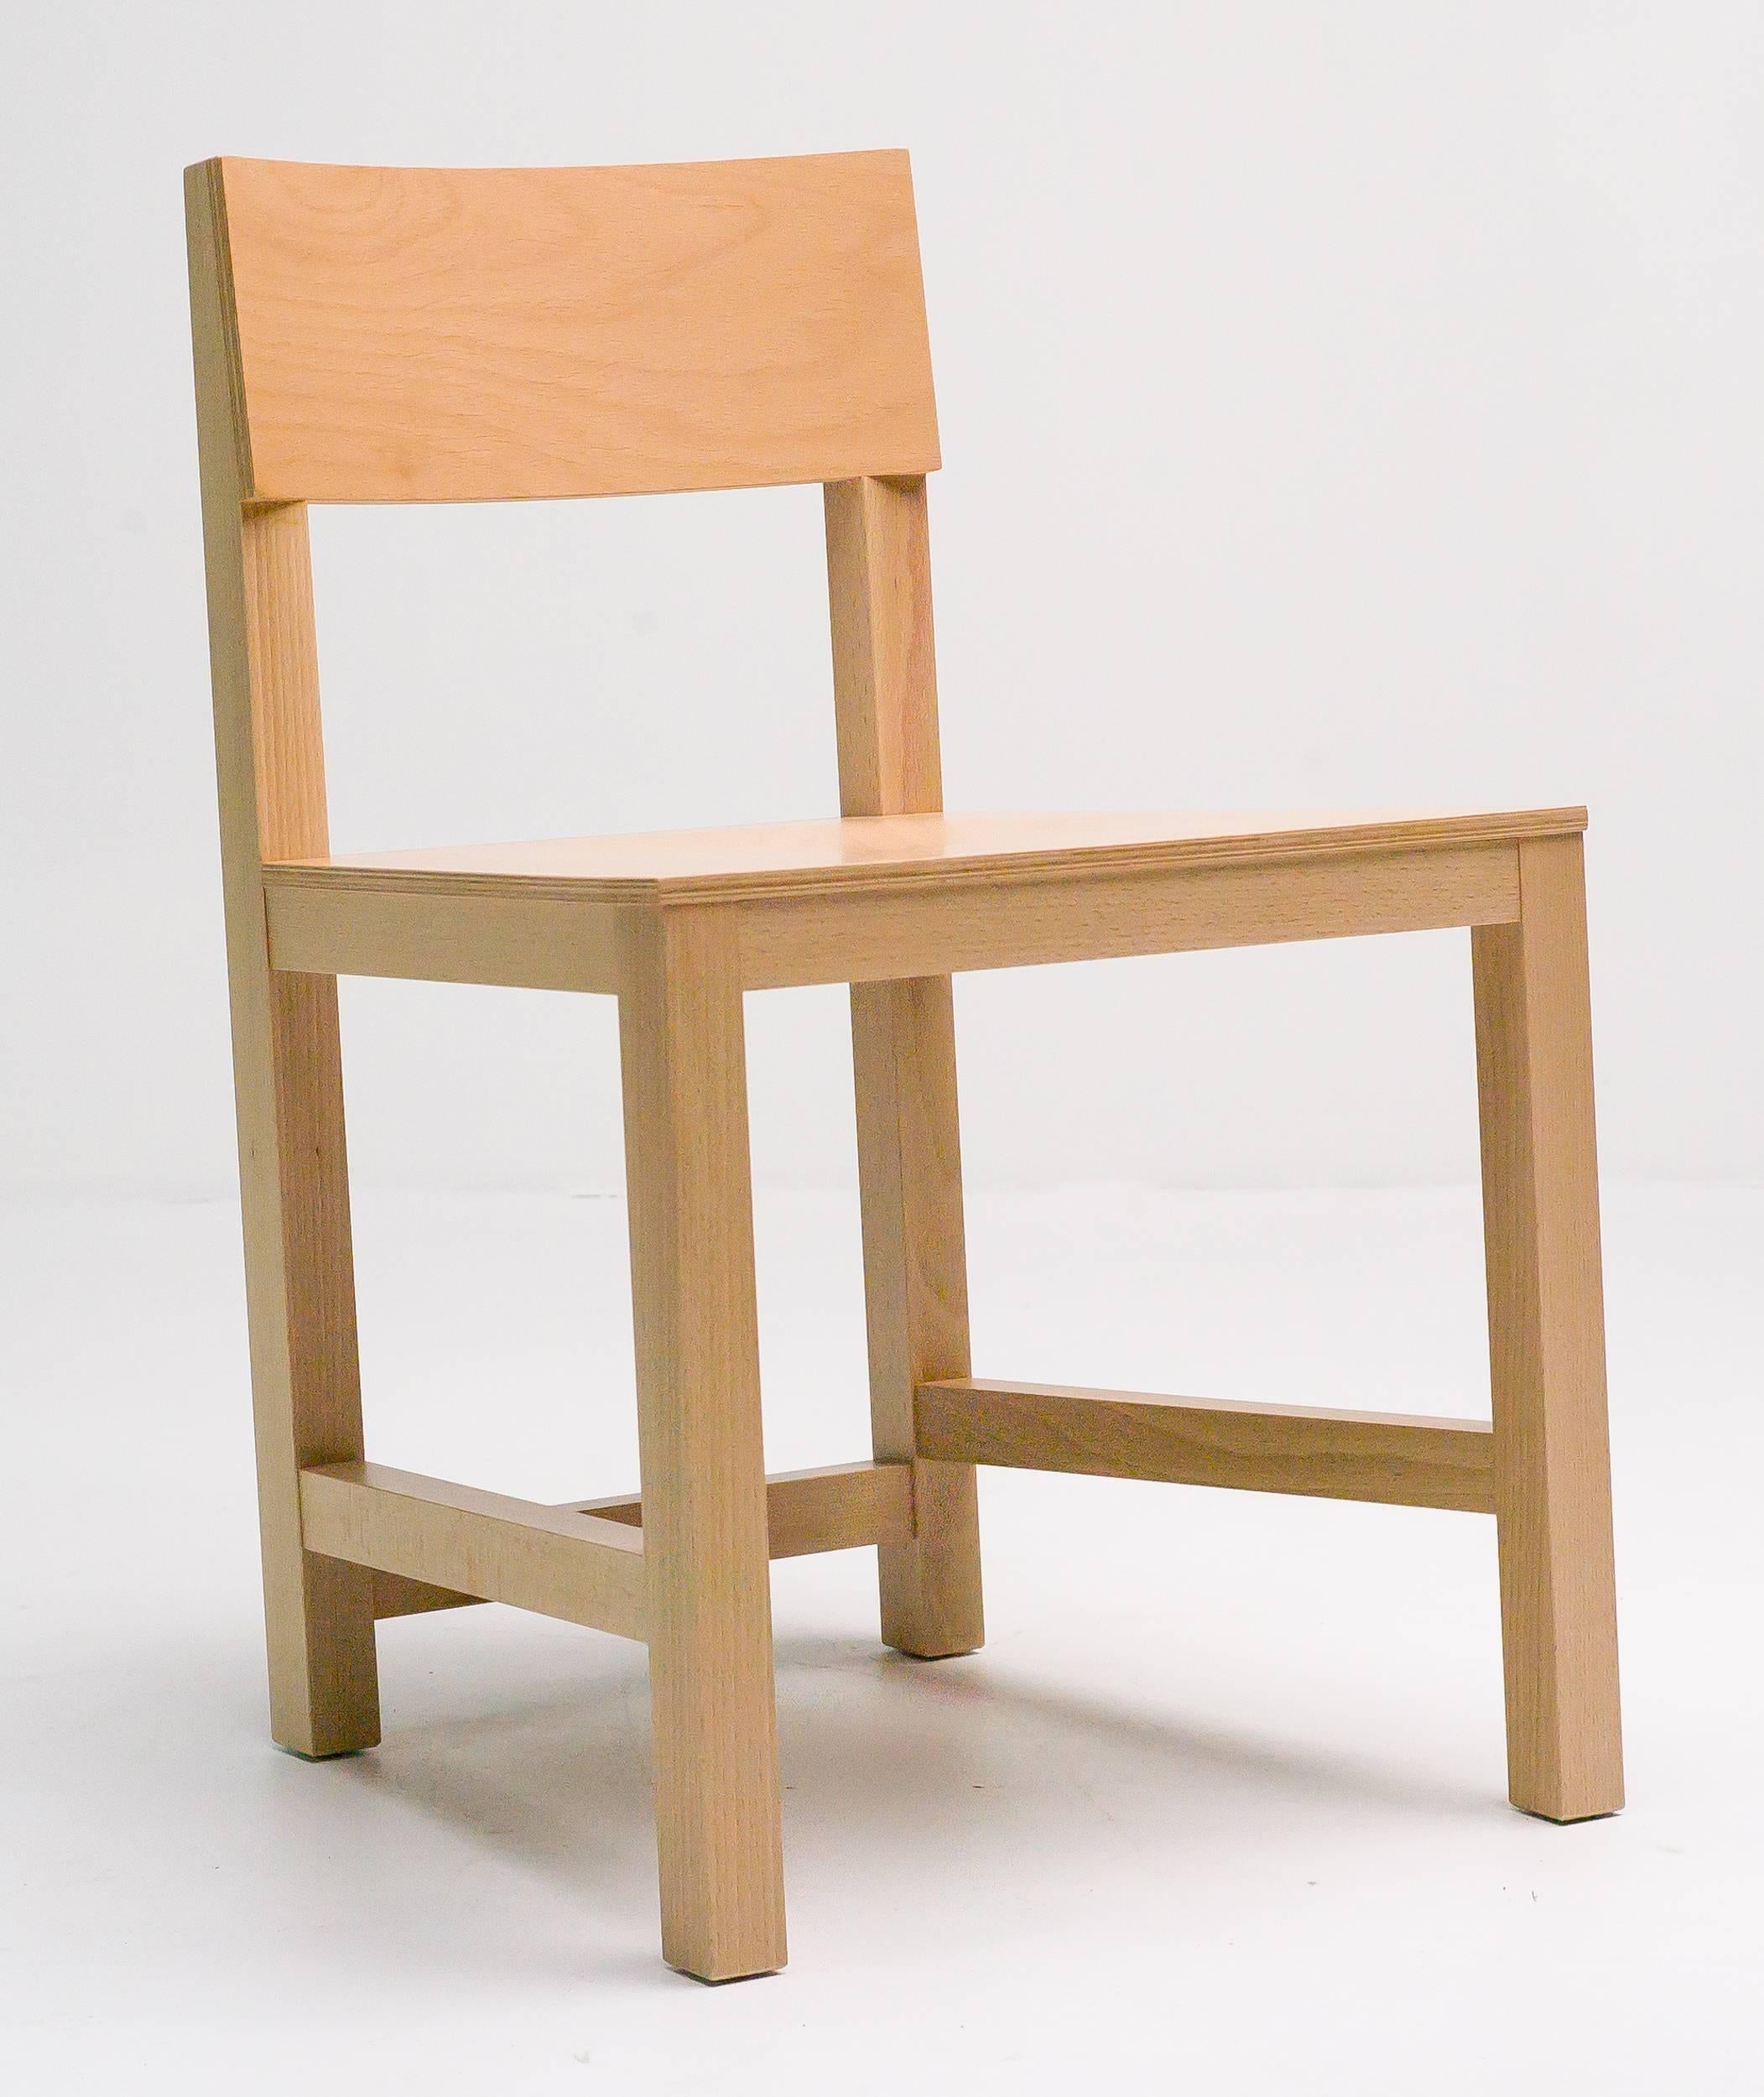 AVL Shaker chair by Joep van Lieshout in ash.
Early Dutch production, brand marked. Priced individually.

